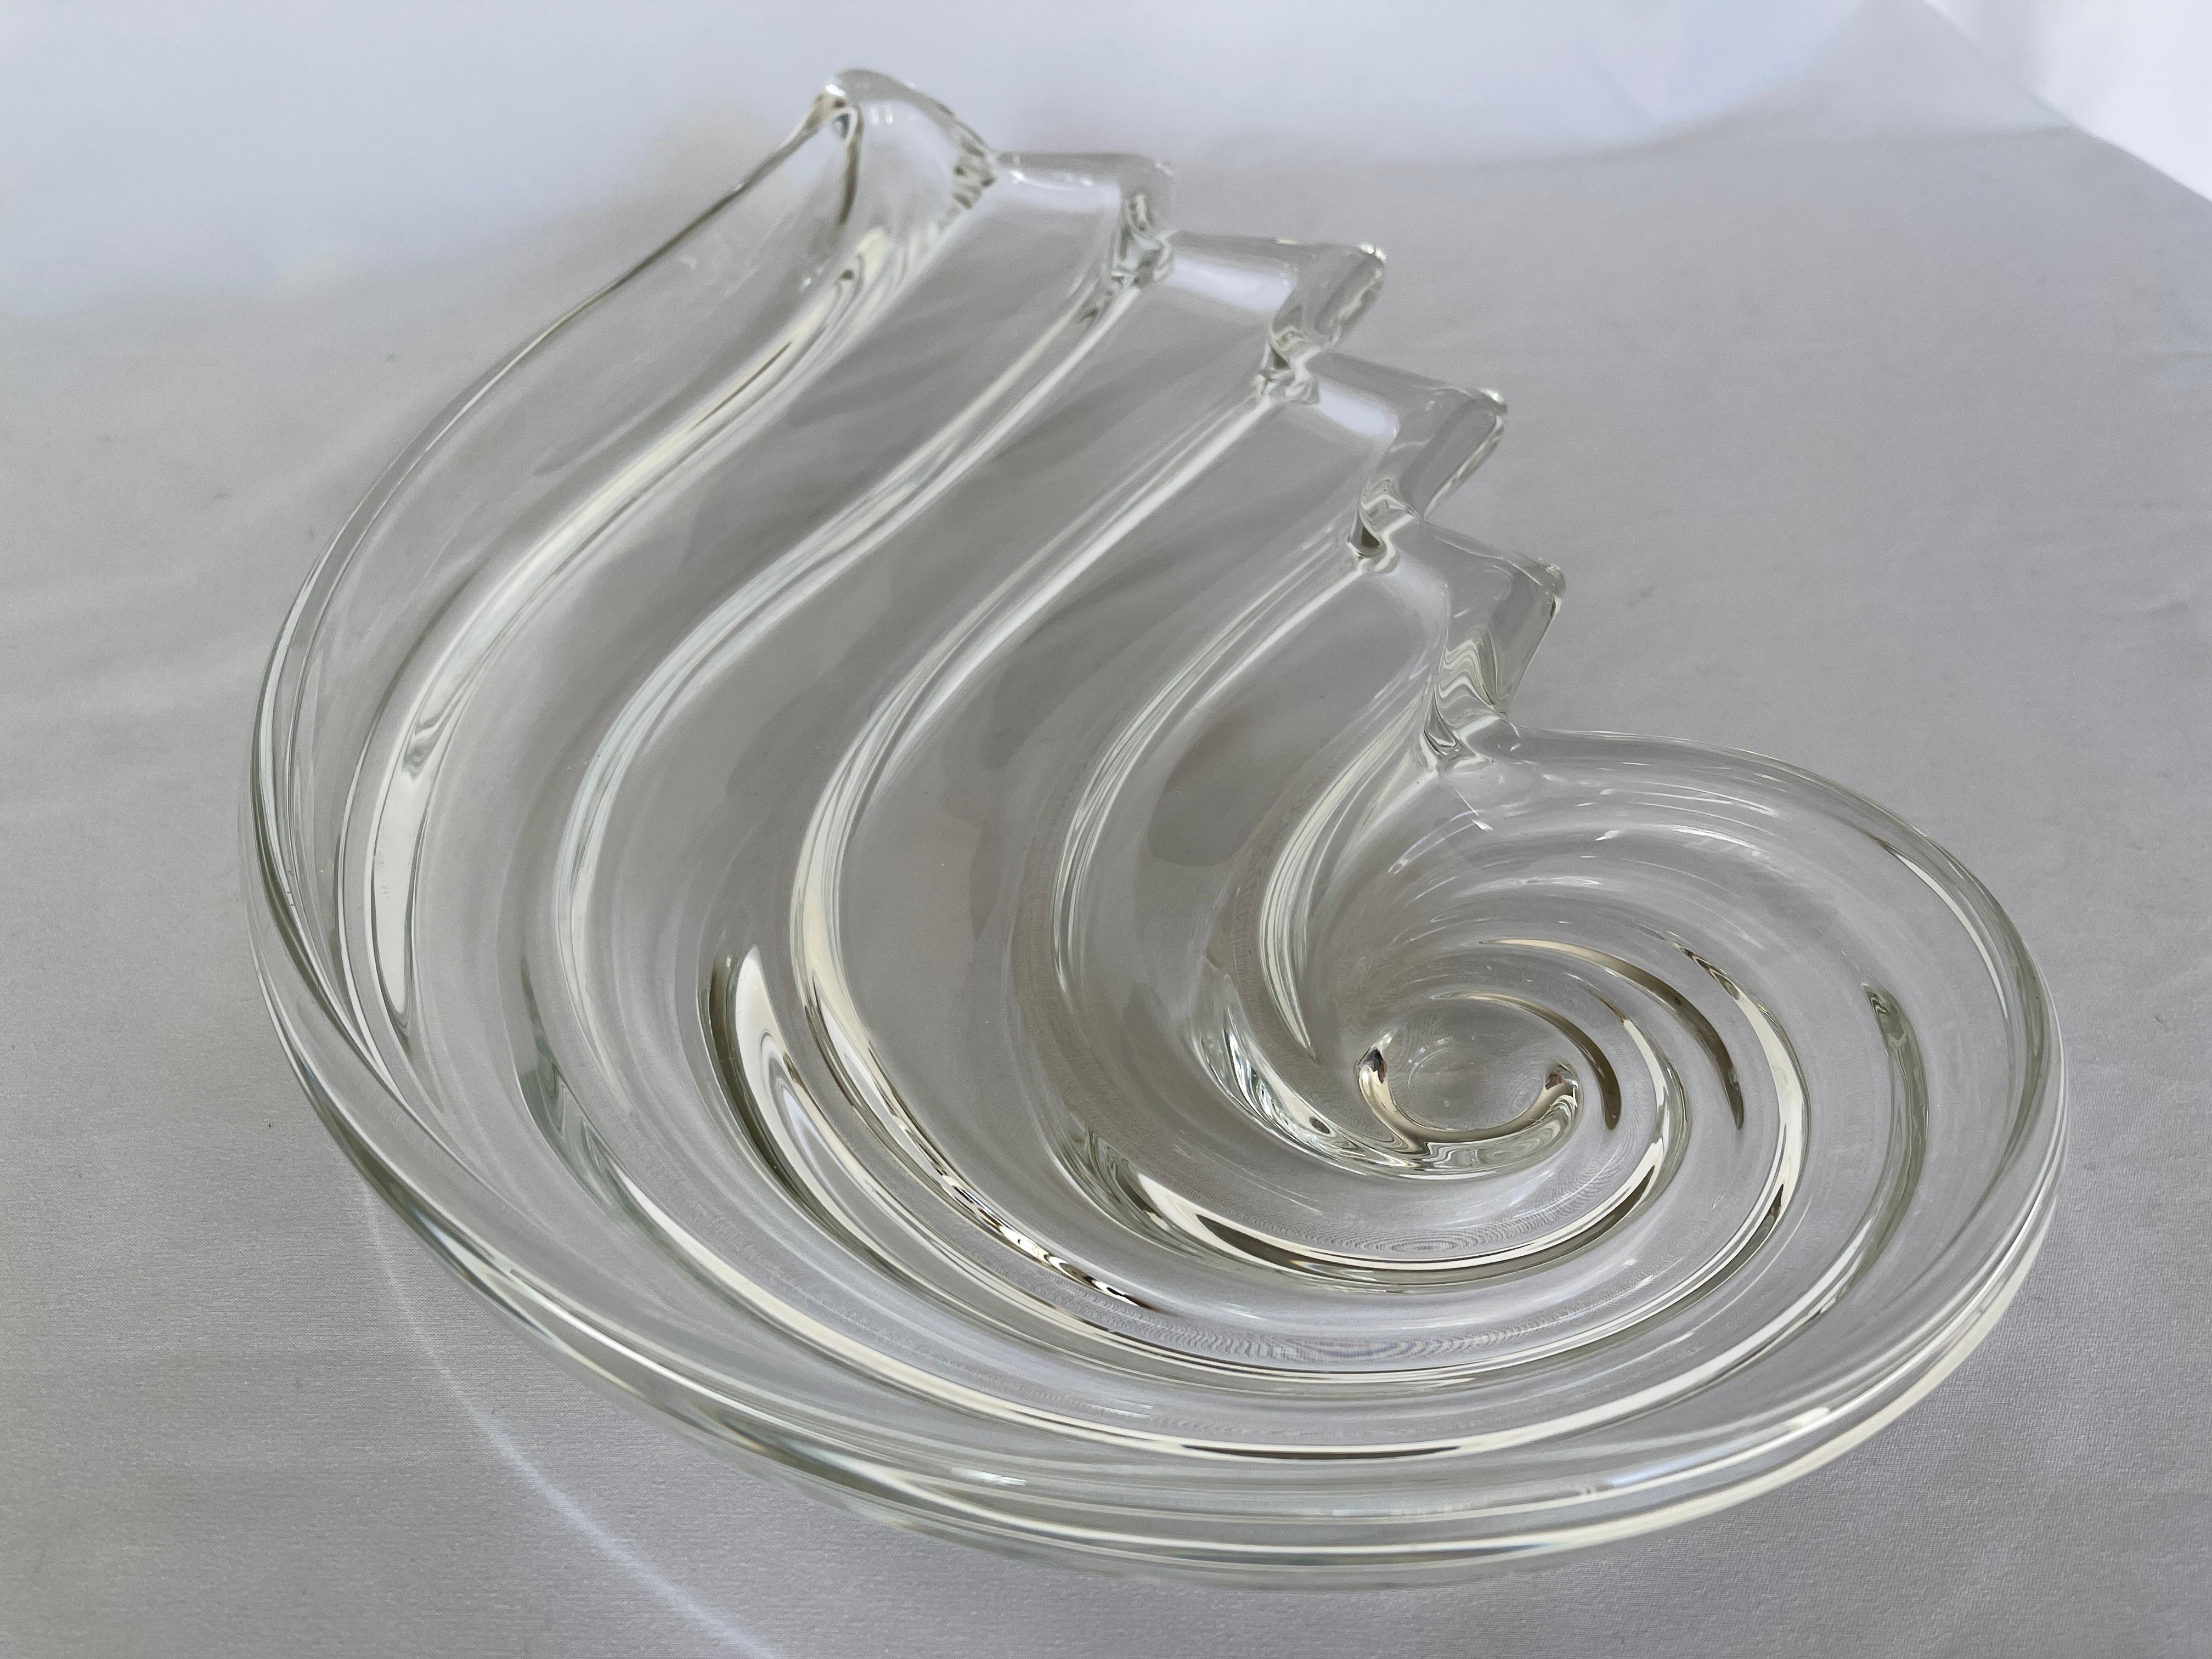 German lead crystal wave form centrepiece serving tray for brilliant table presentation. Tray measures 19